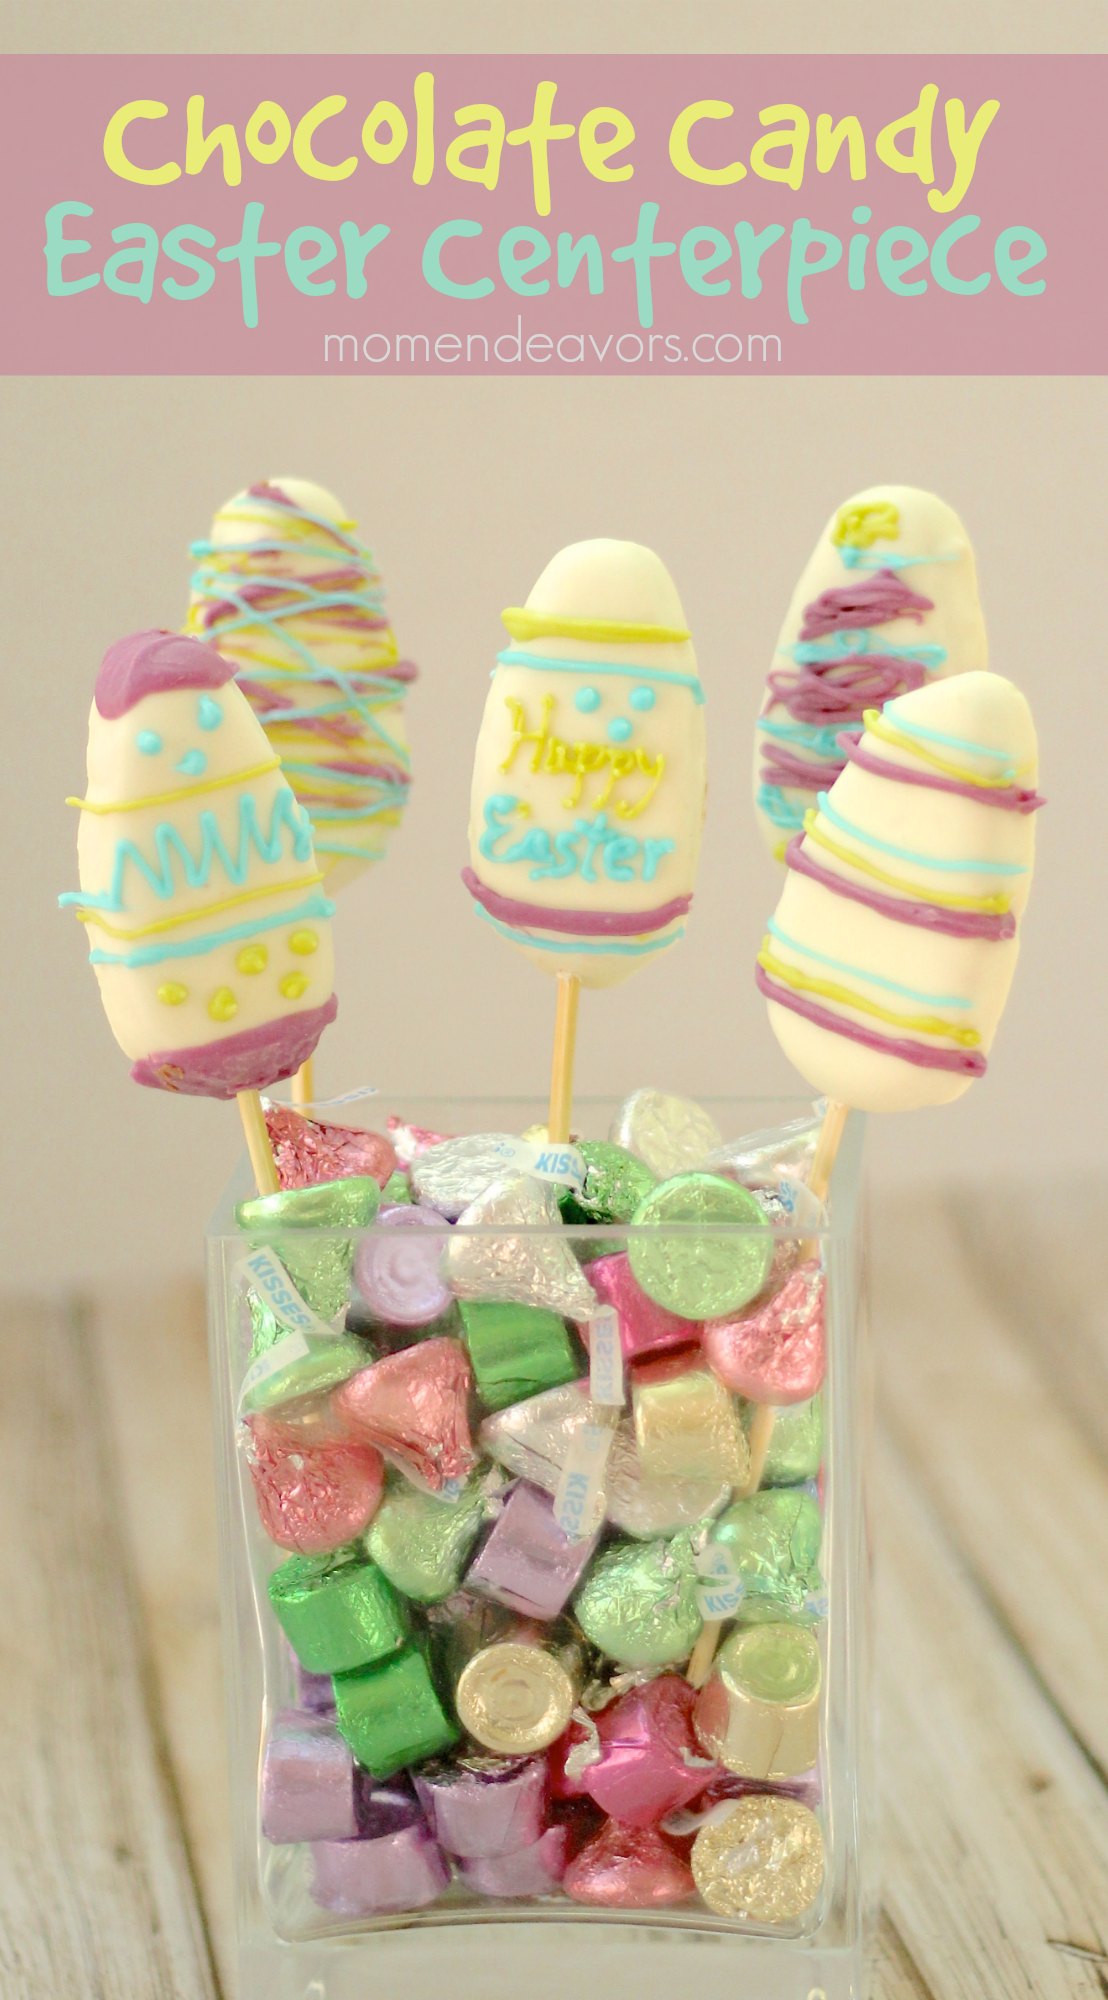 Chocolate Candy Easter Centerpiece